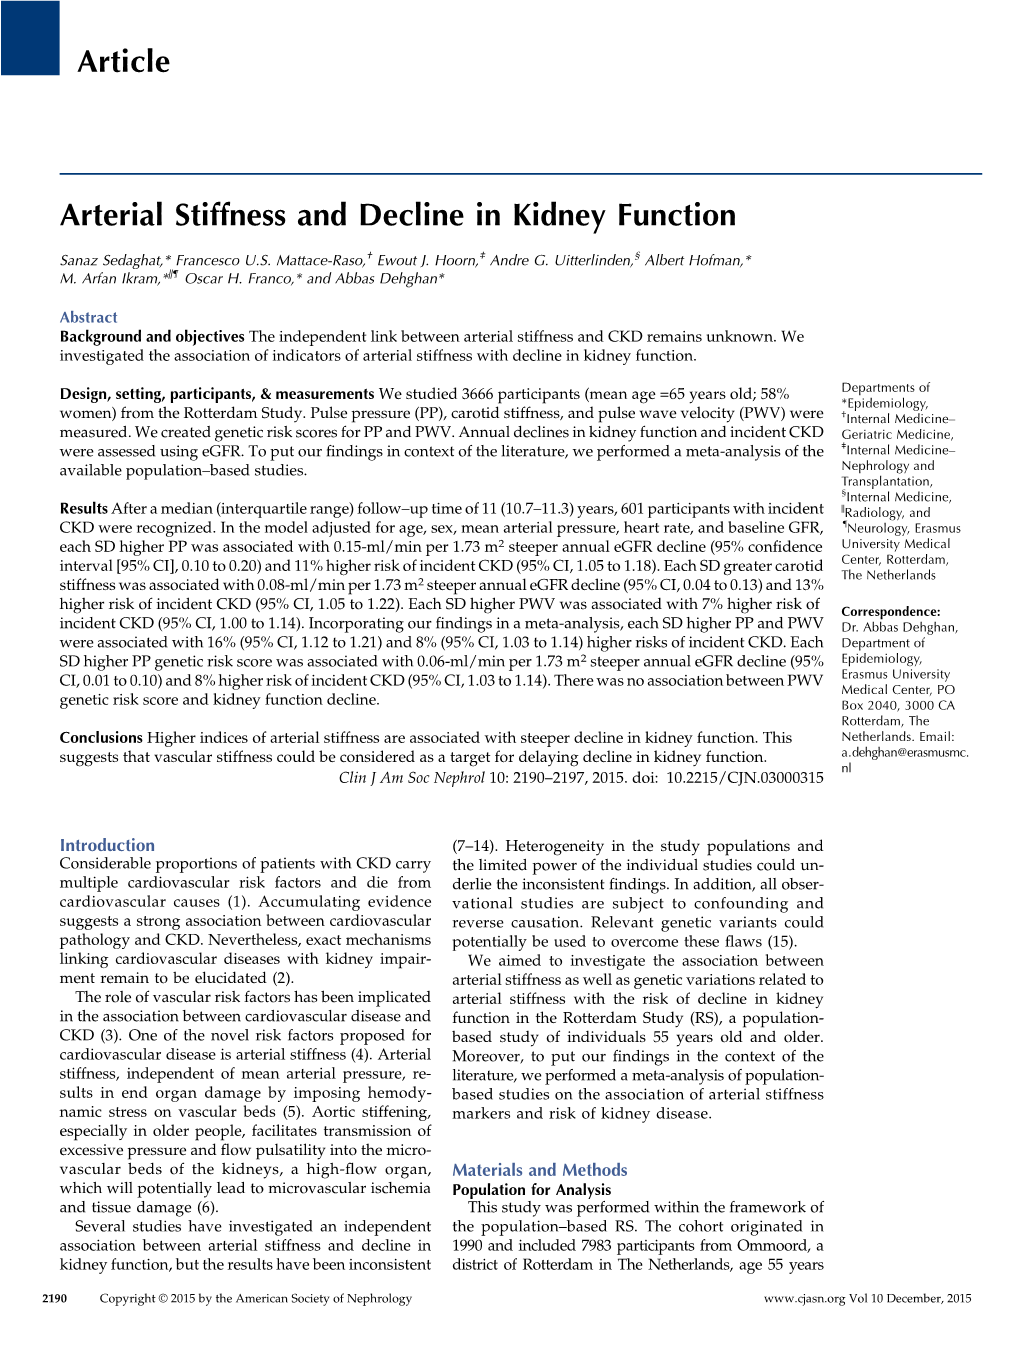 Article Arterial Stiffness and Decline in Kidney Function